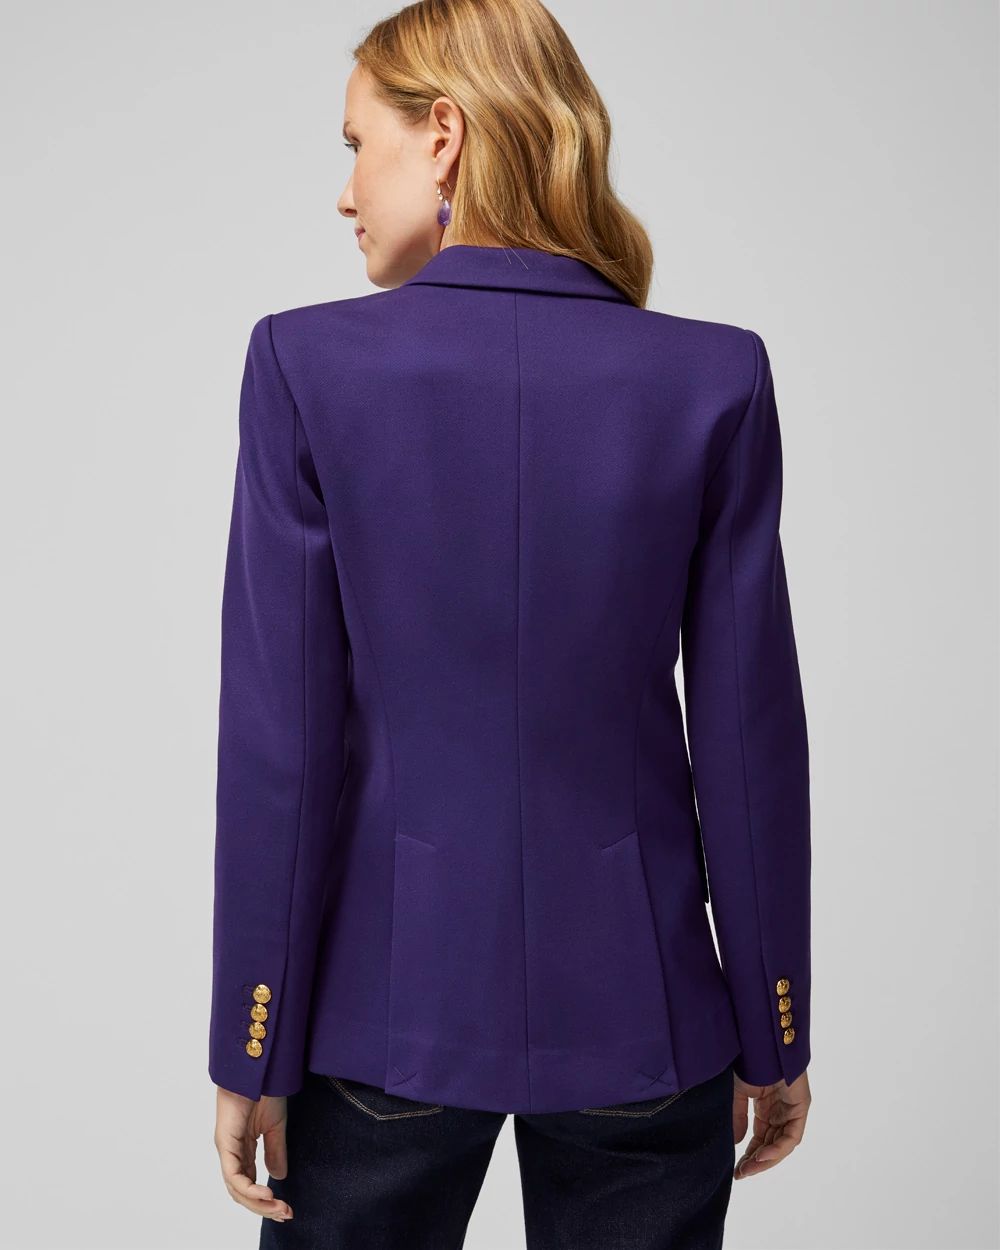 WHBM® Petite Luxe Stretch Editor Blazer click to view larger image.